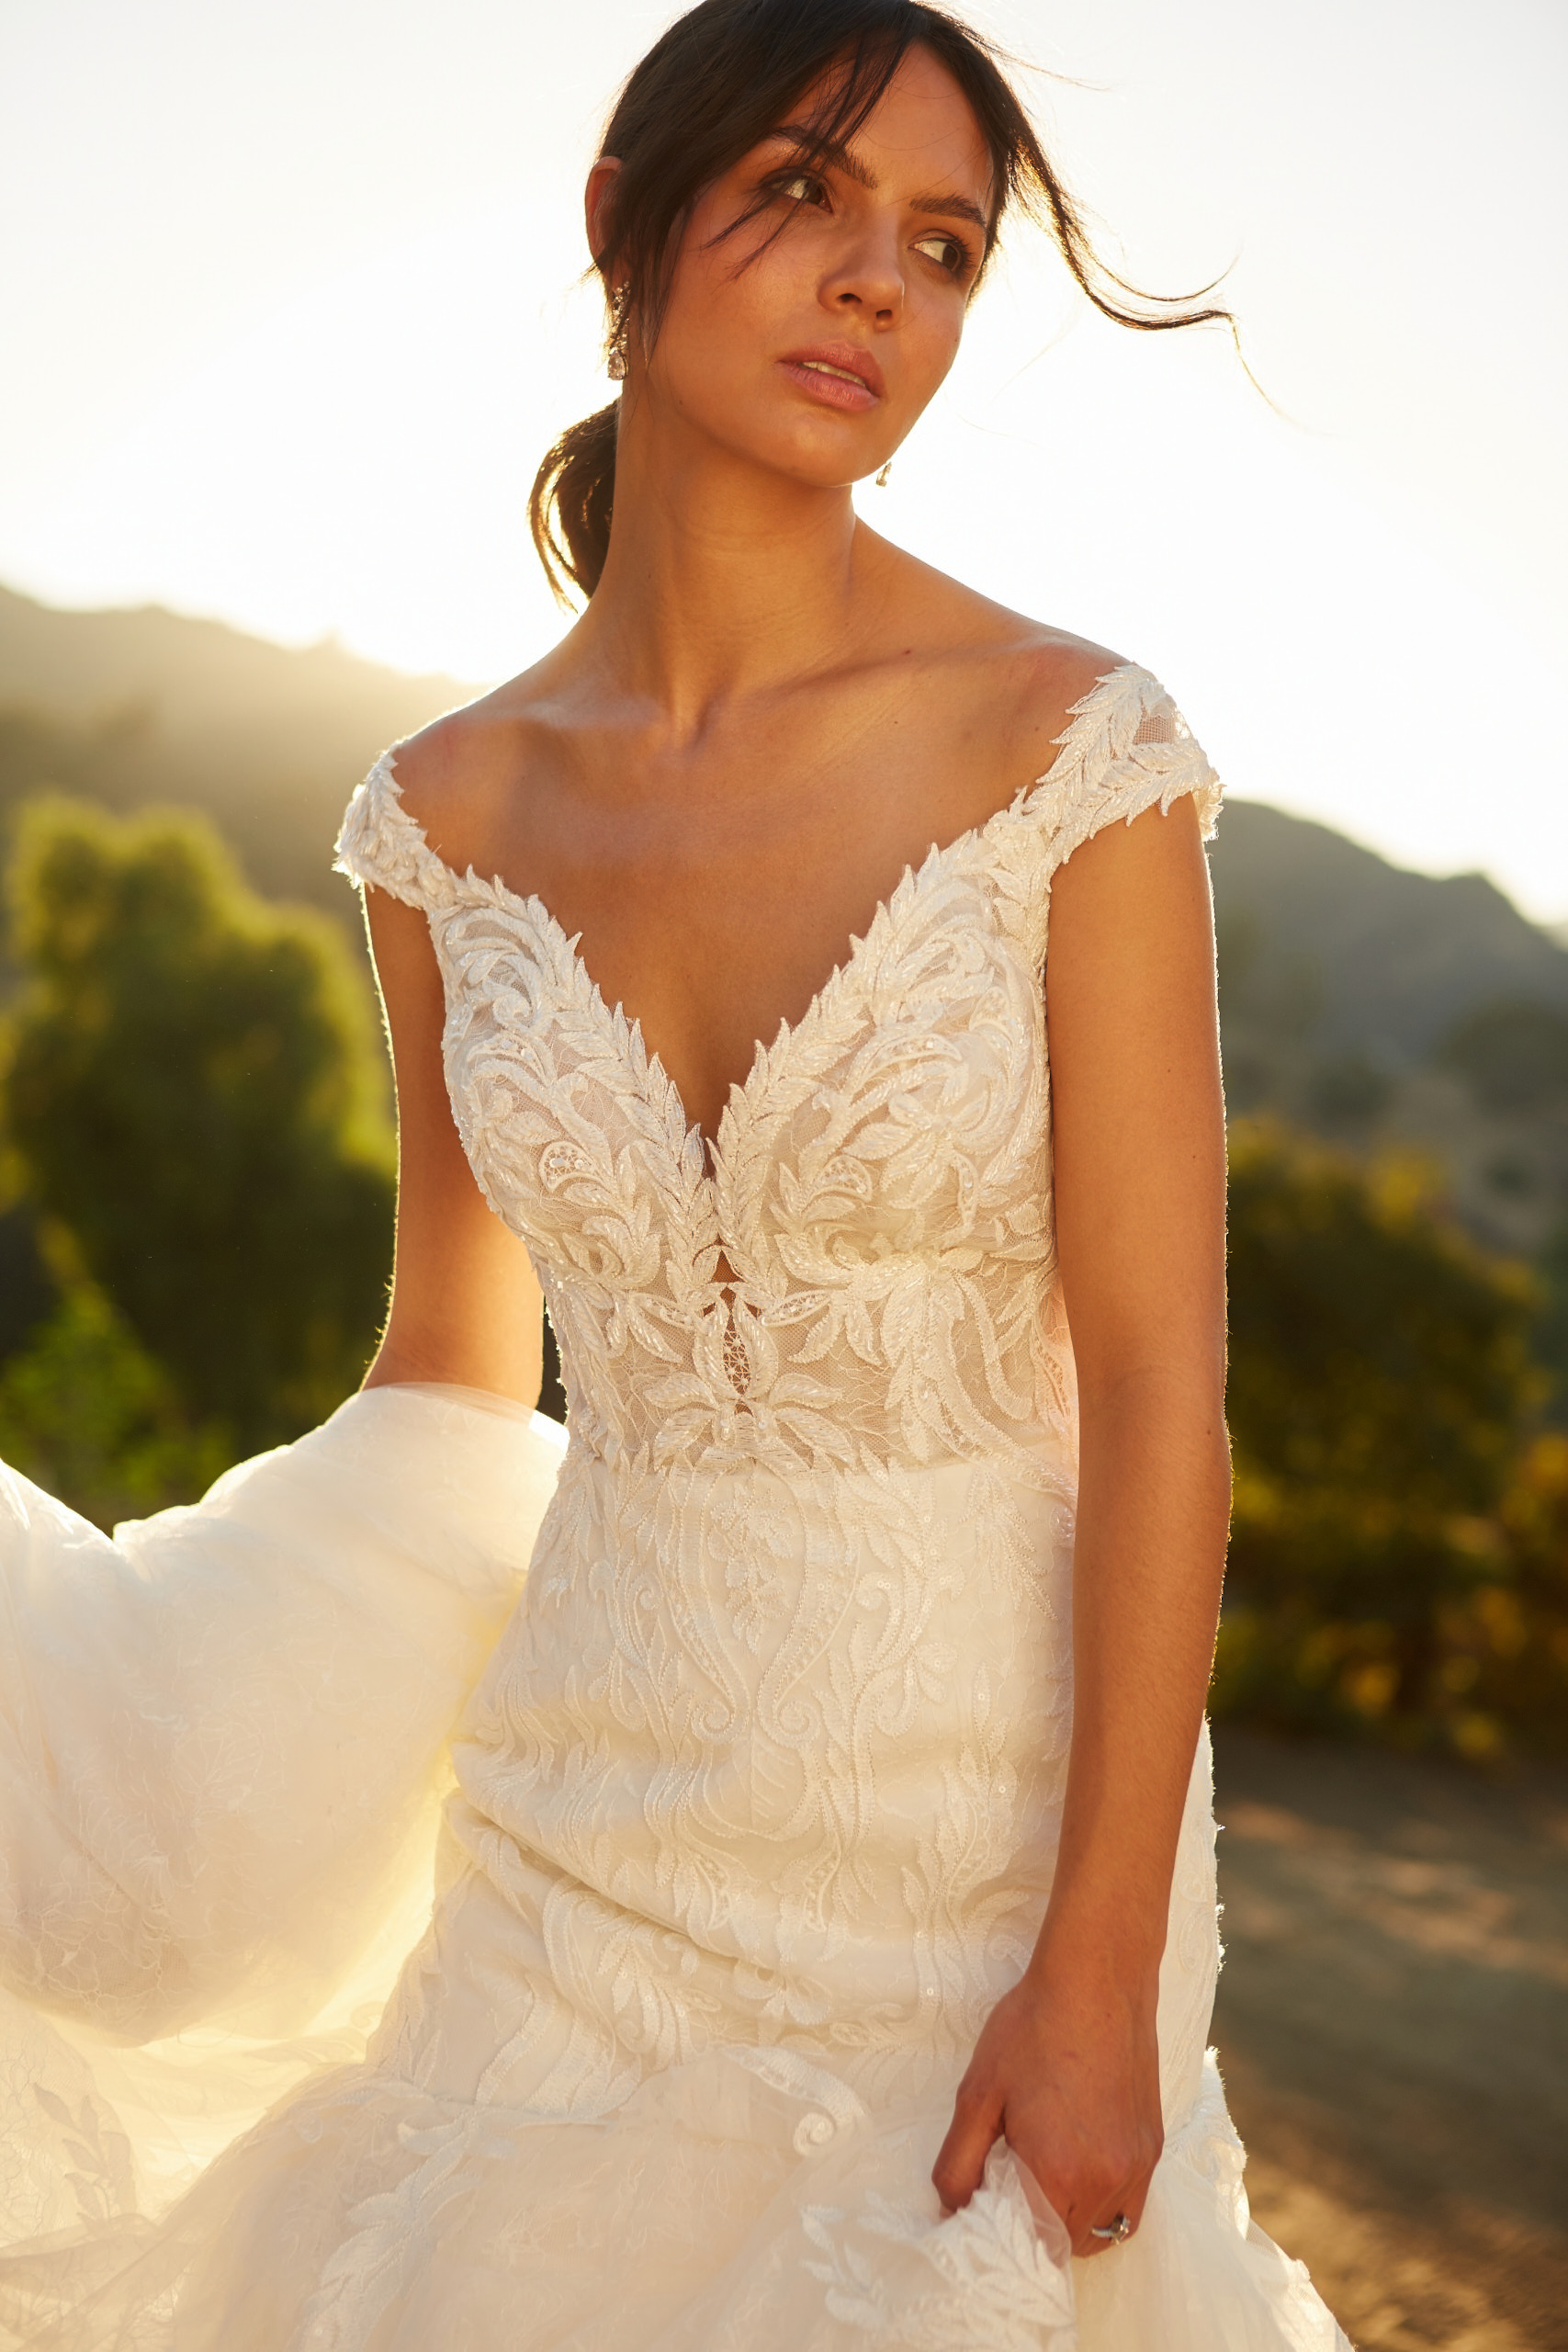 Joss by Sottero and Midgley (4)